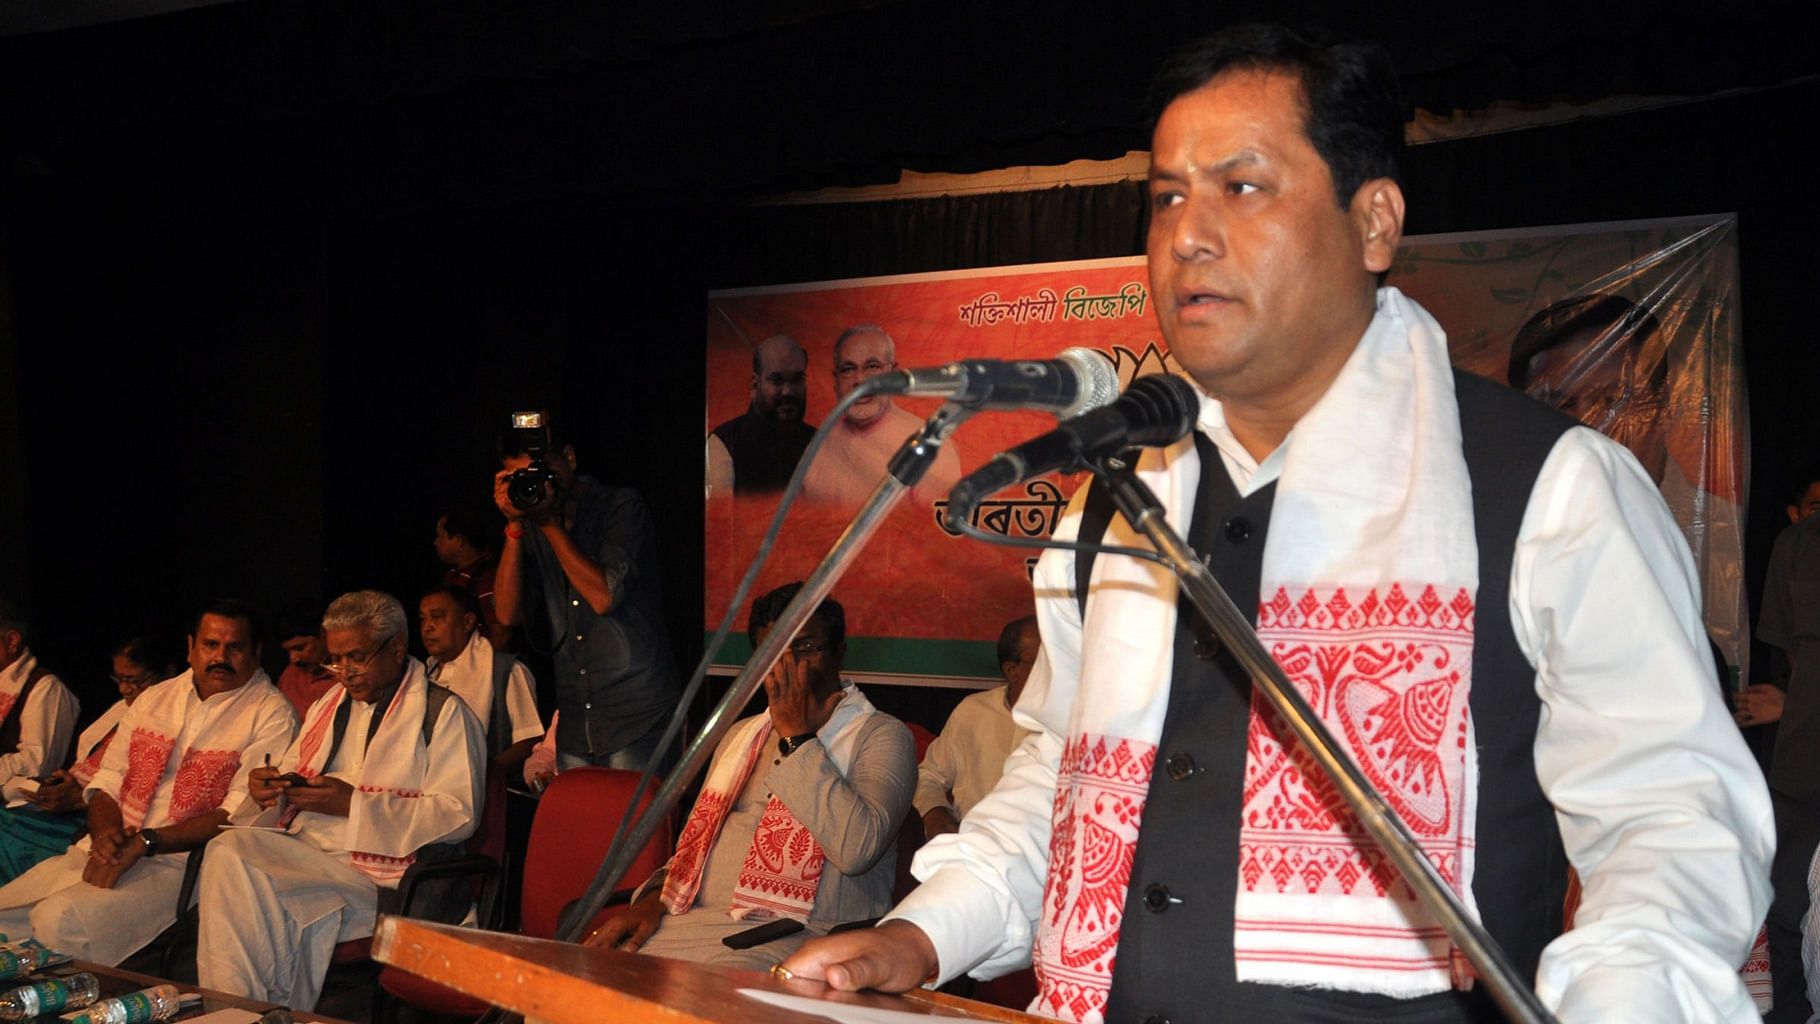 Assam’s Chief Minister-to-be Sarbanand Sonowal  in Guwahati. (Photo: IANS)